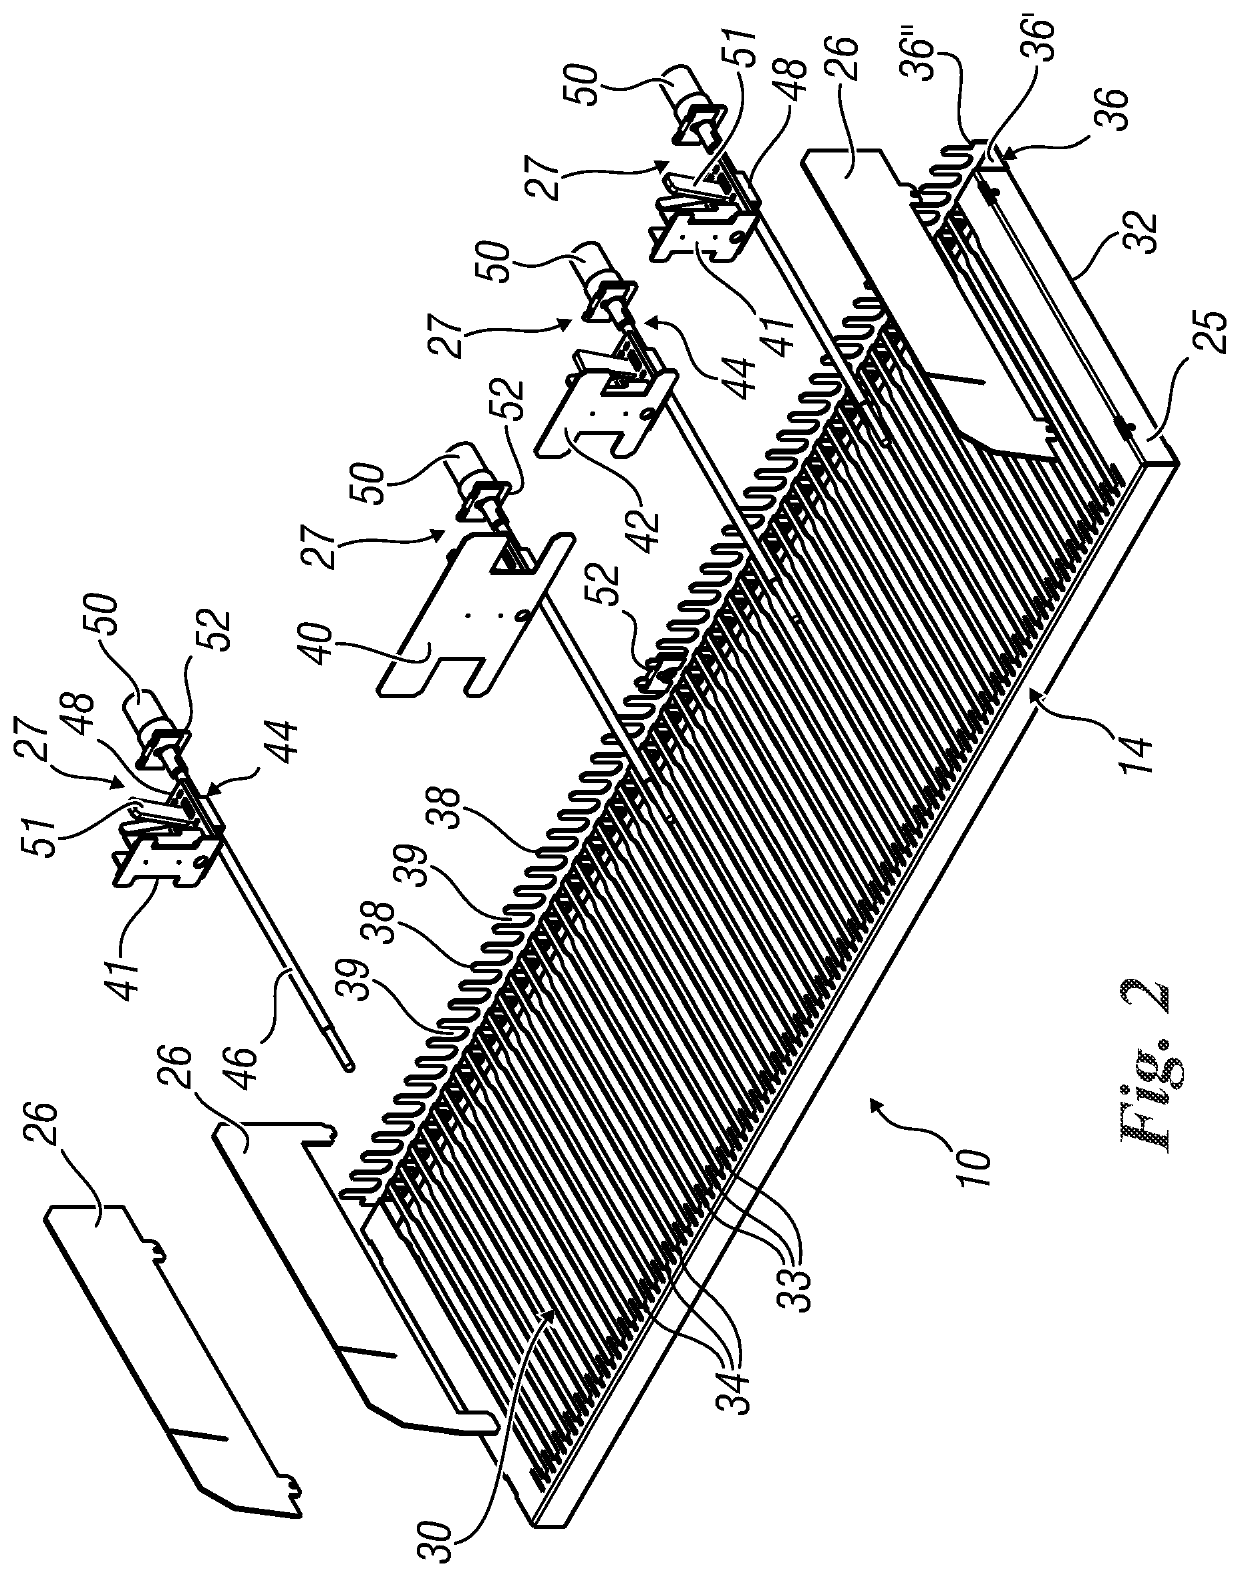 Enhanced ejection device for an automatic vending machine